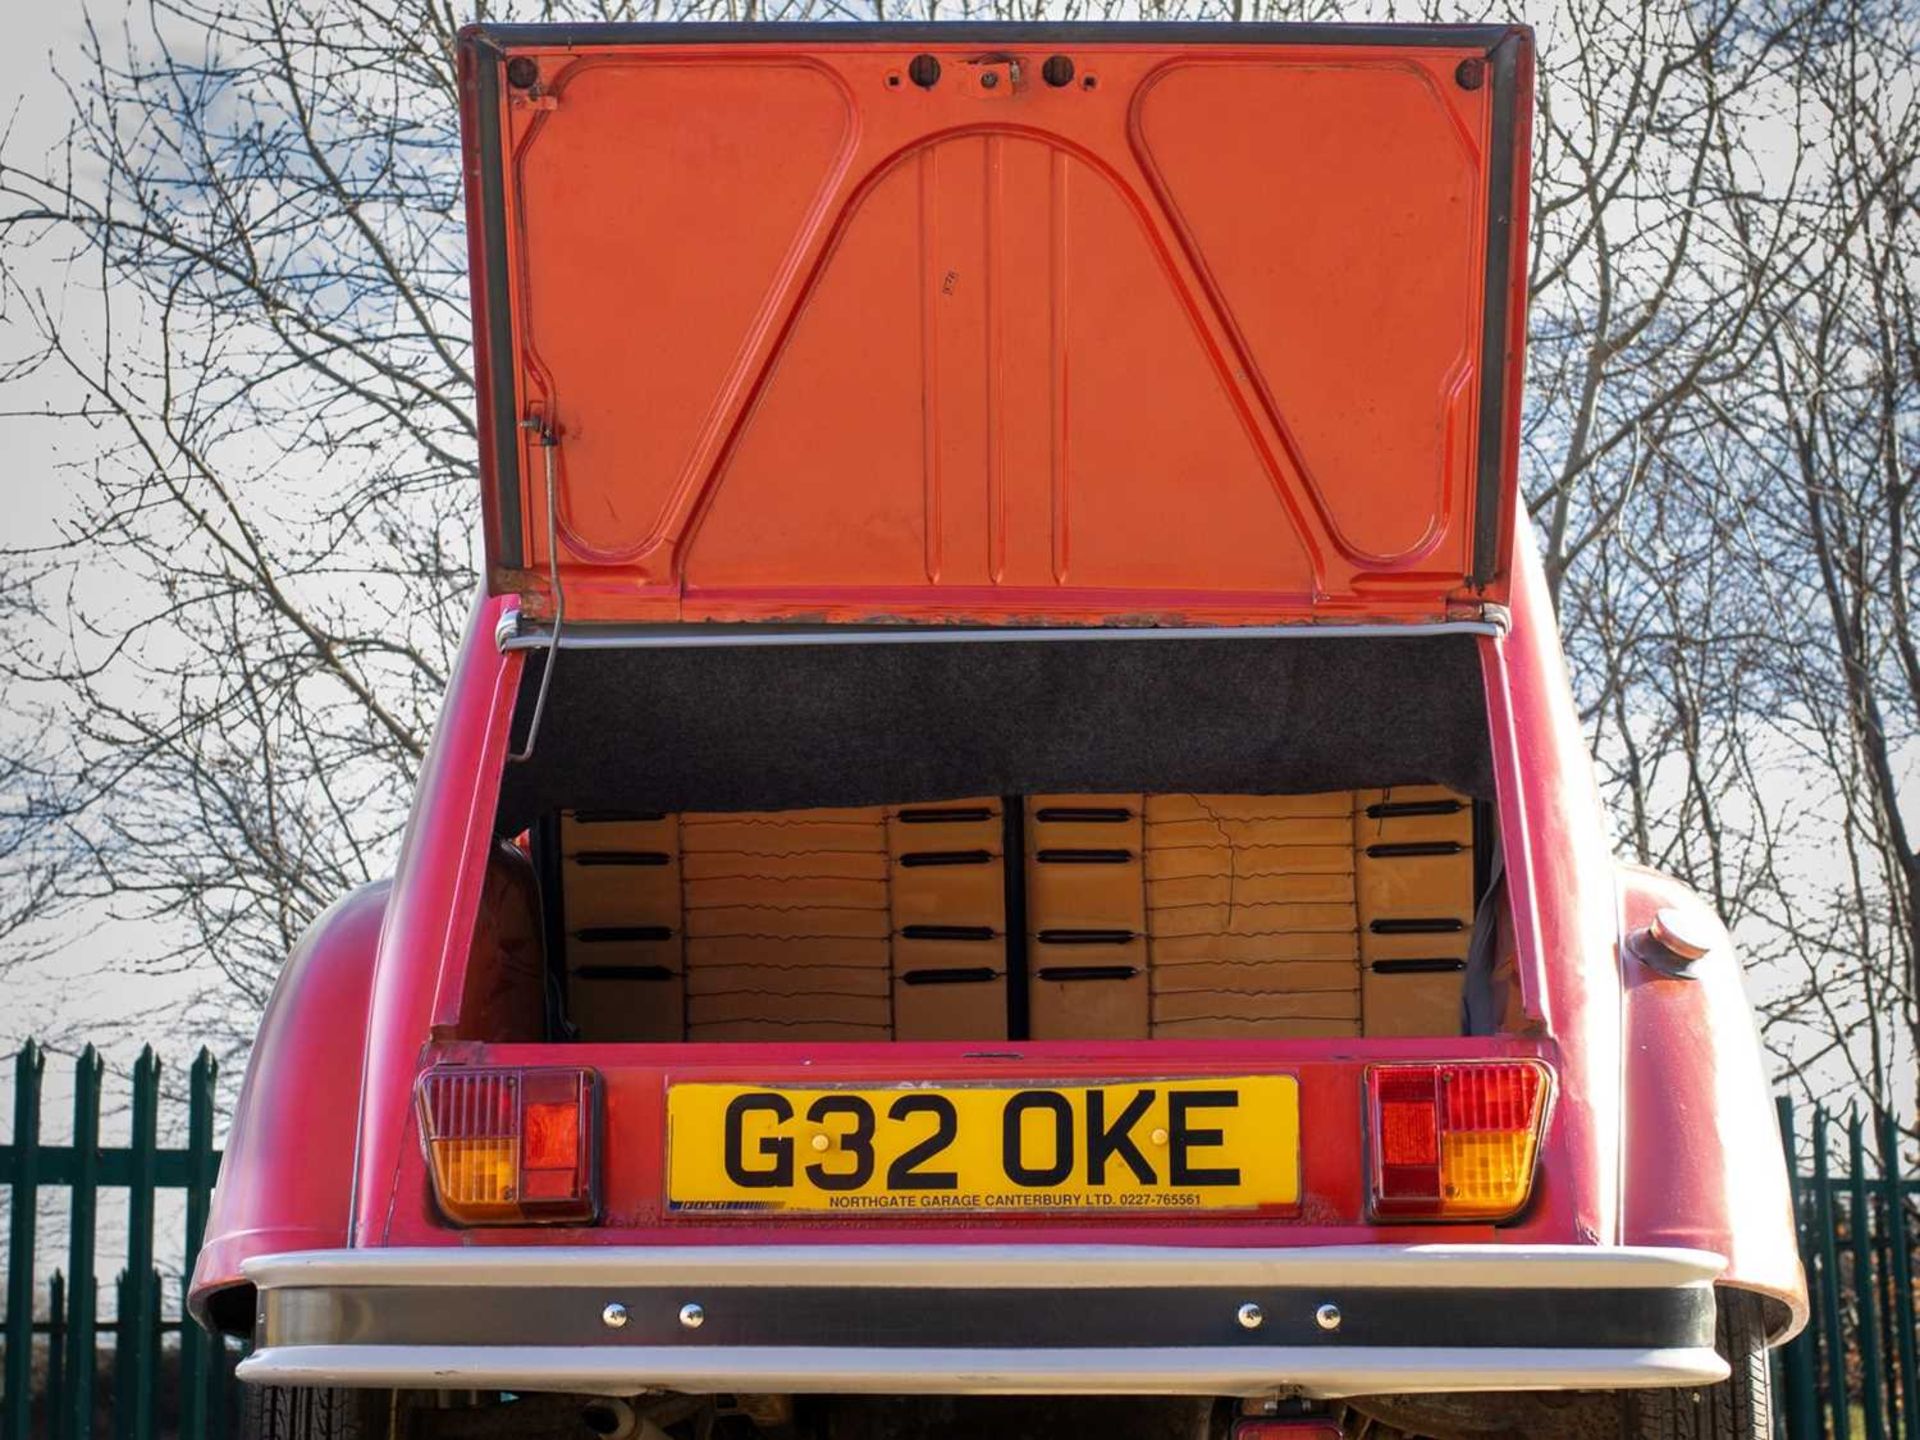 1989 Citroën 2CV6 Spécial Believed to have covered a credible 15,000 miles - Image 21 of 113